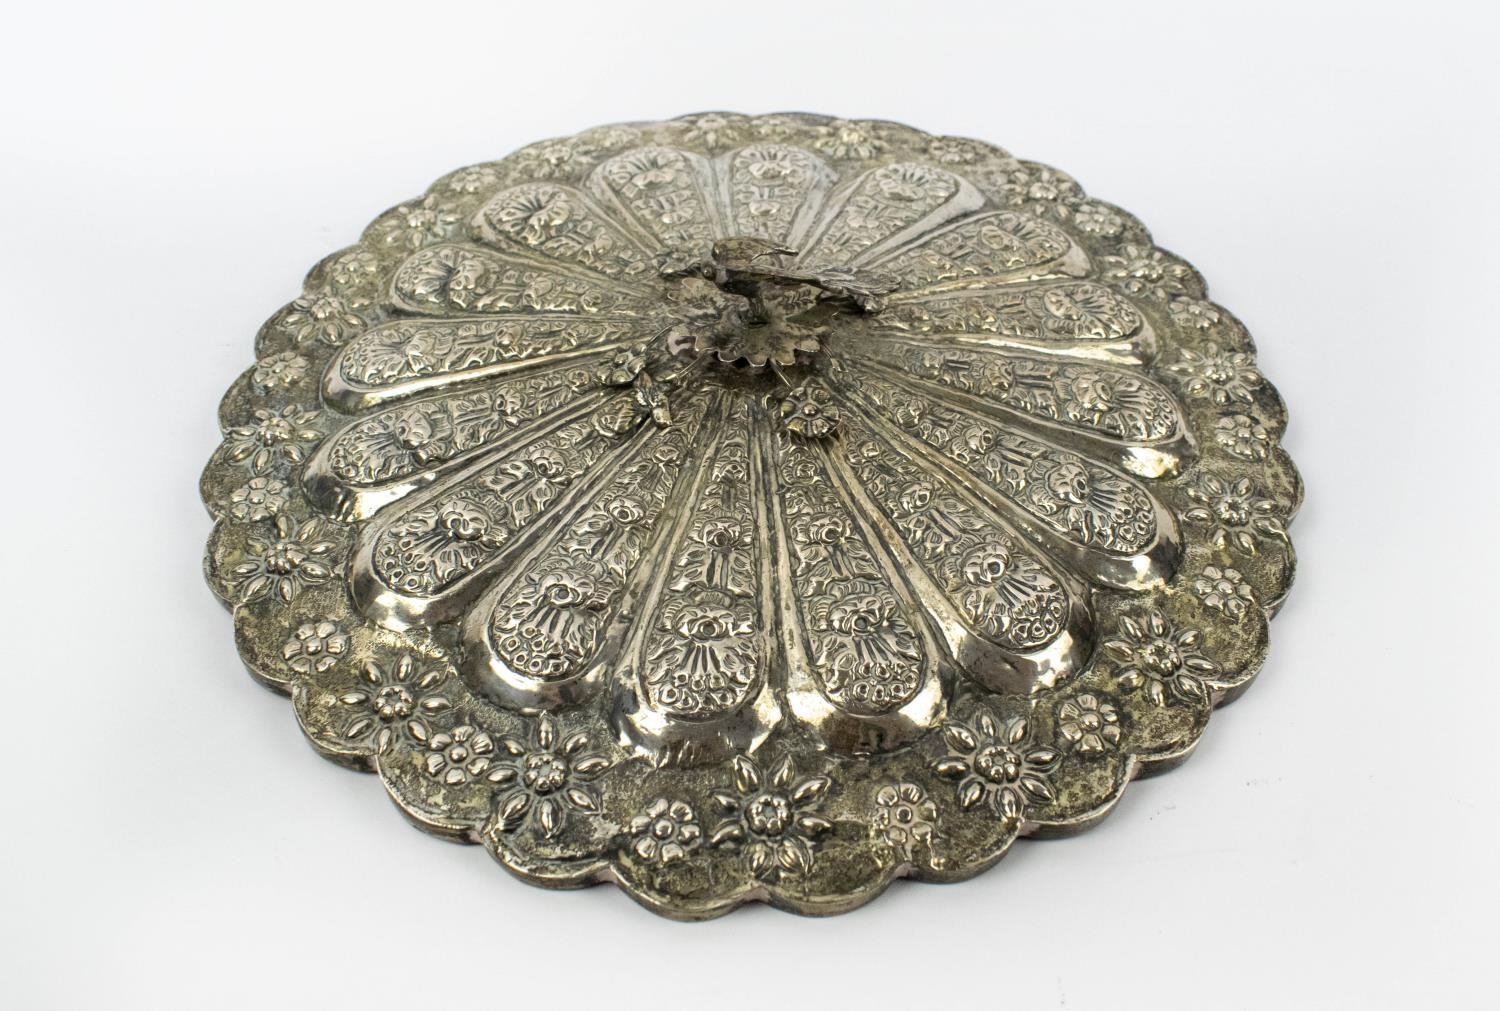 OTTOMAN SILVER REPOUSSE MIRROR, with foliate decoration and mounted bird, 28cm diam. - Image 2 of 5